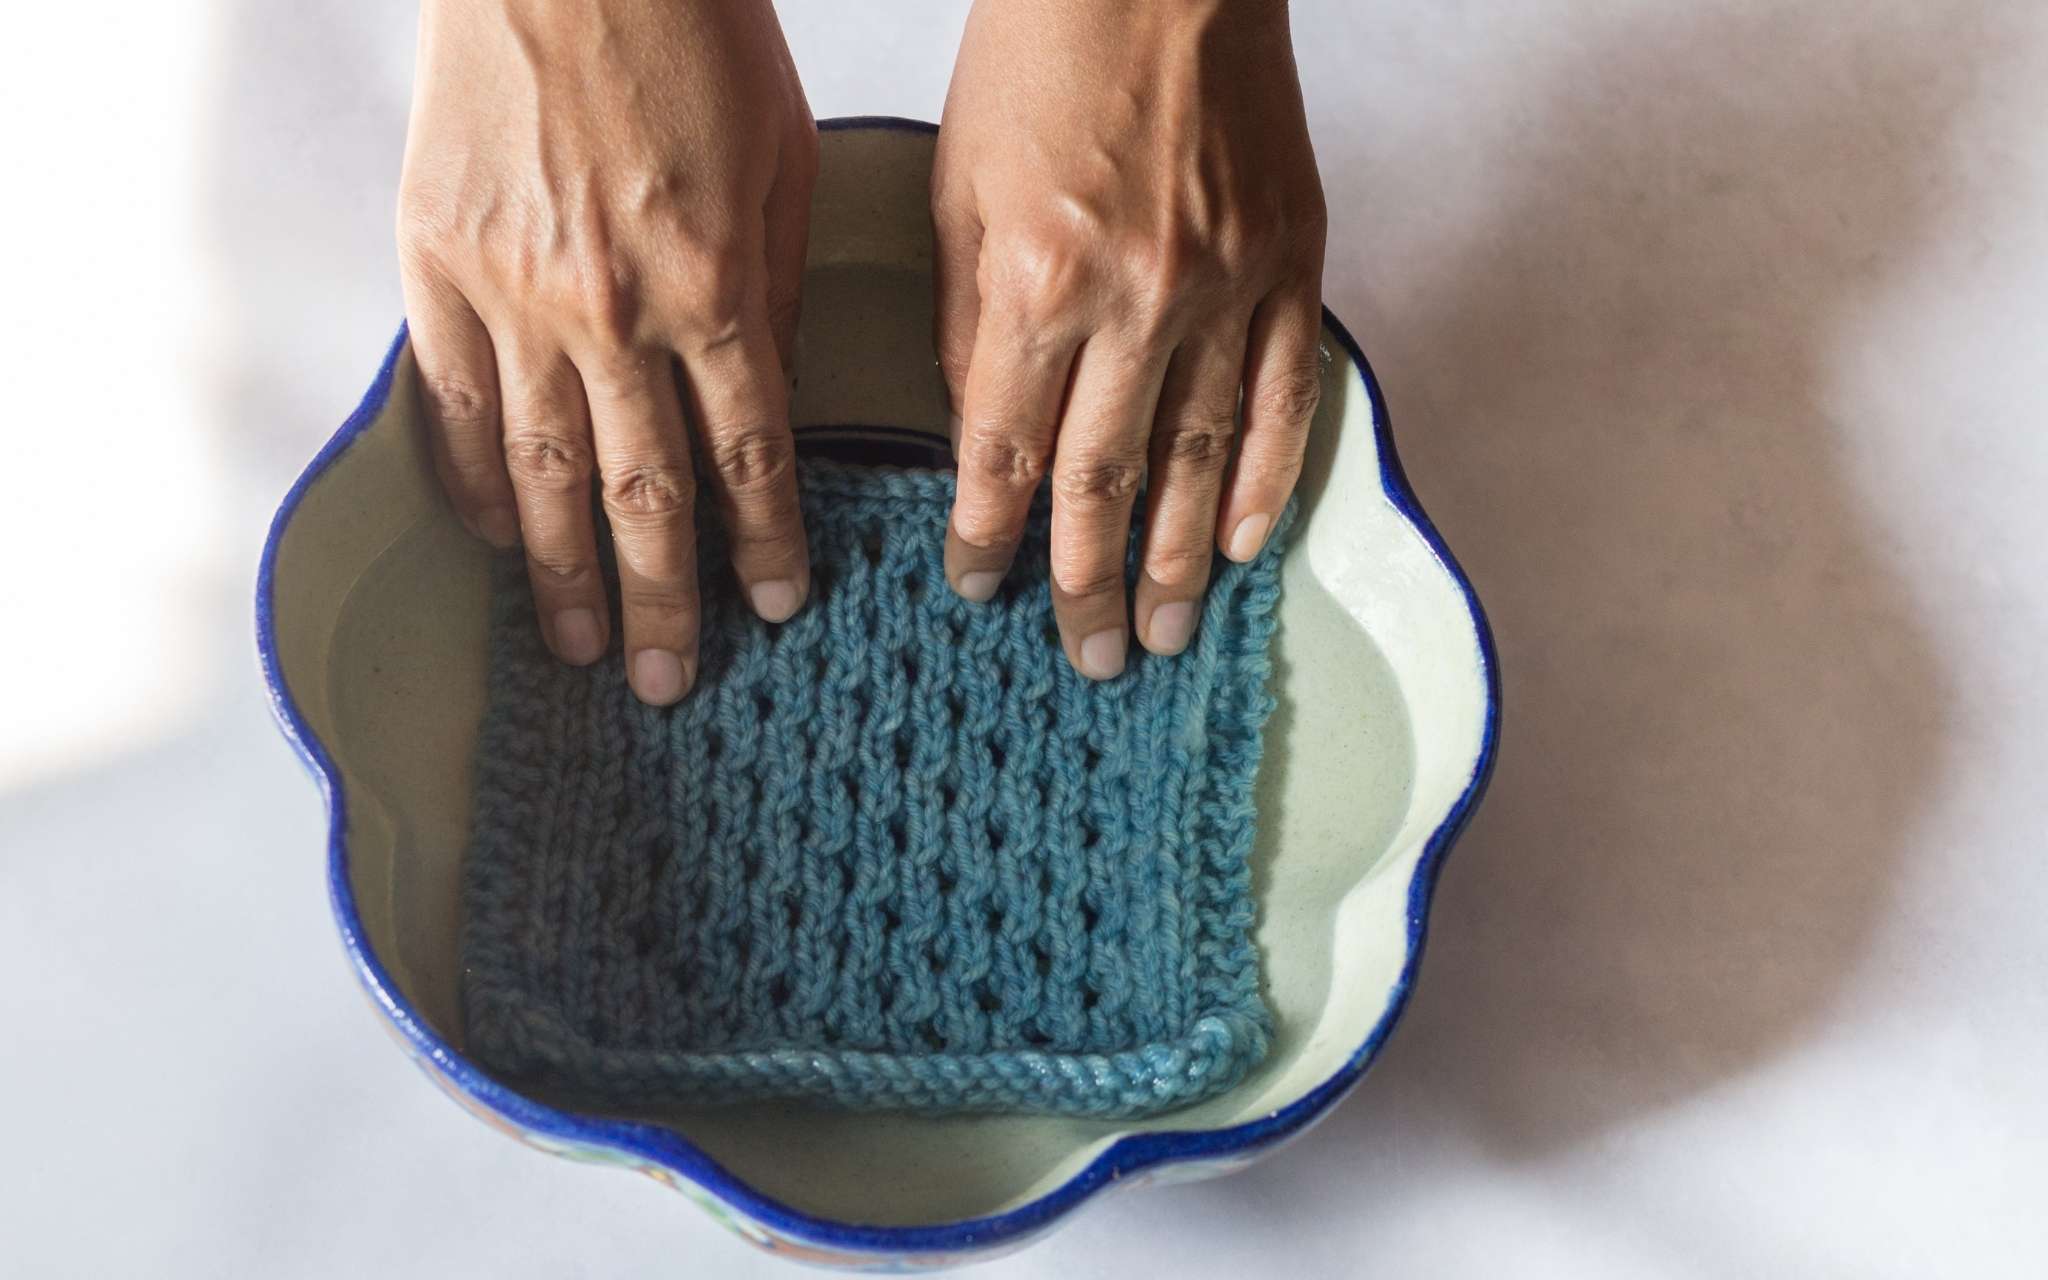 A swatch is being held during water in a small bowl with scalloped shaped edges.